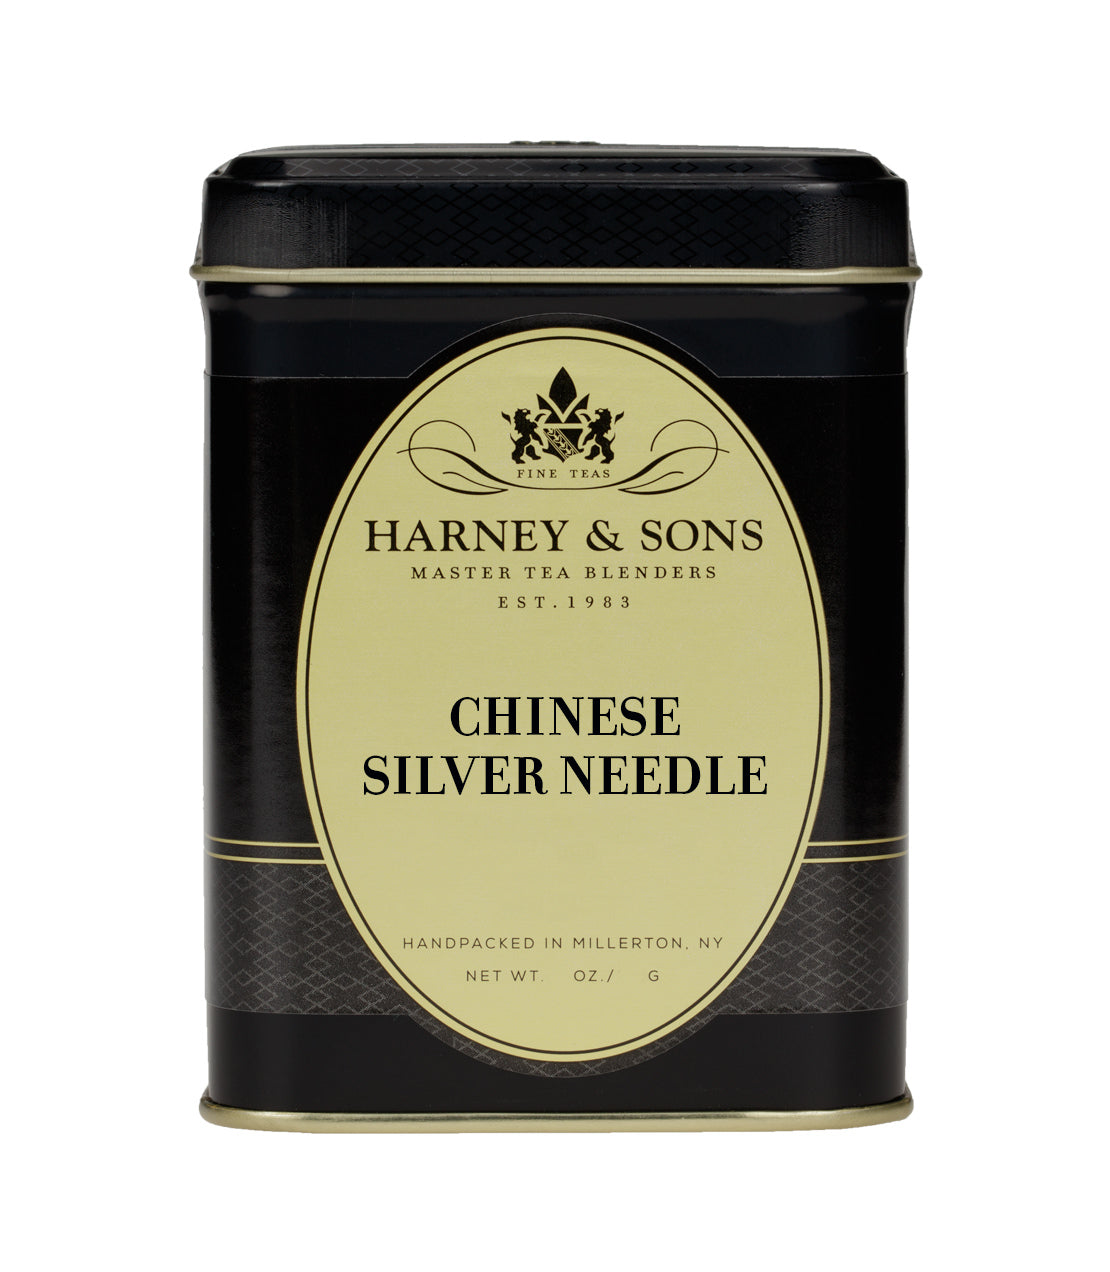 Chinese Silver Needle - Loose 2 oz. Tin - Harney & Sons Fine Teas